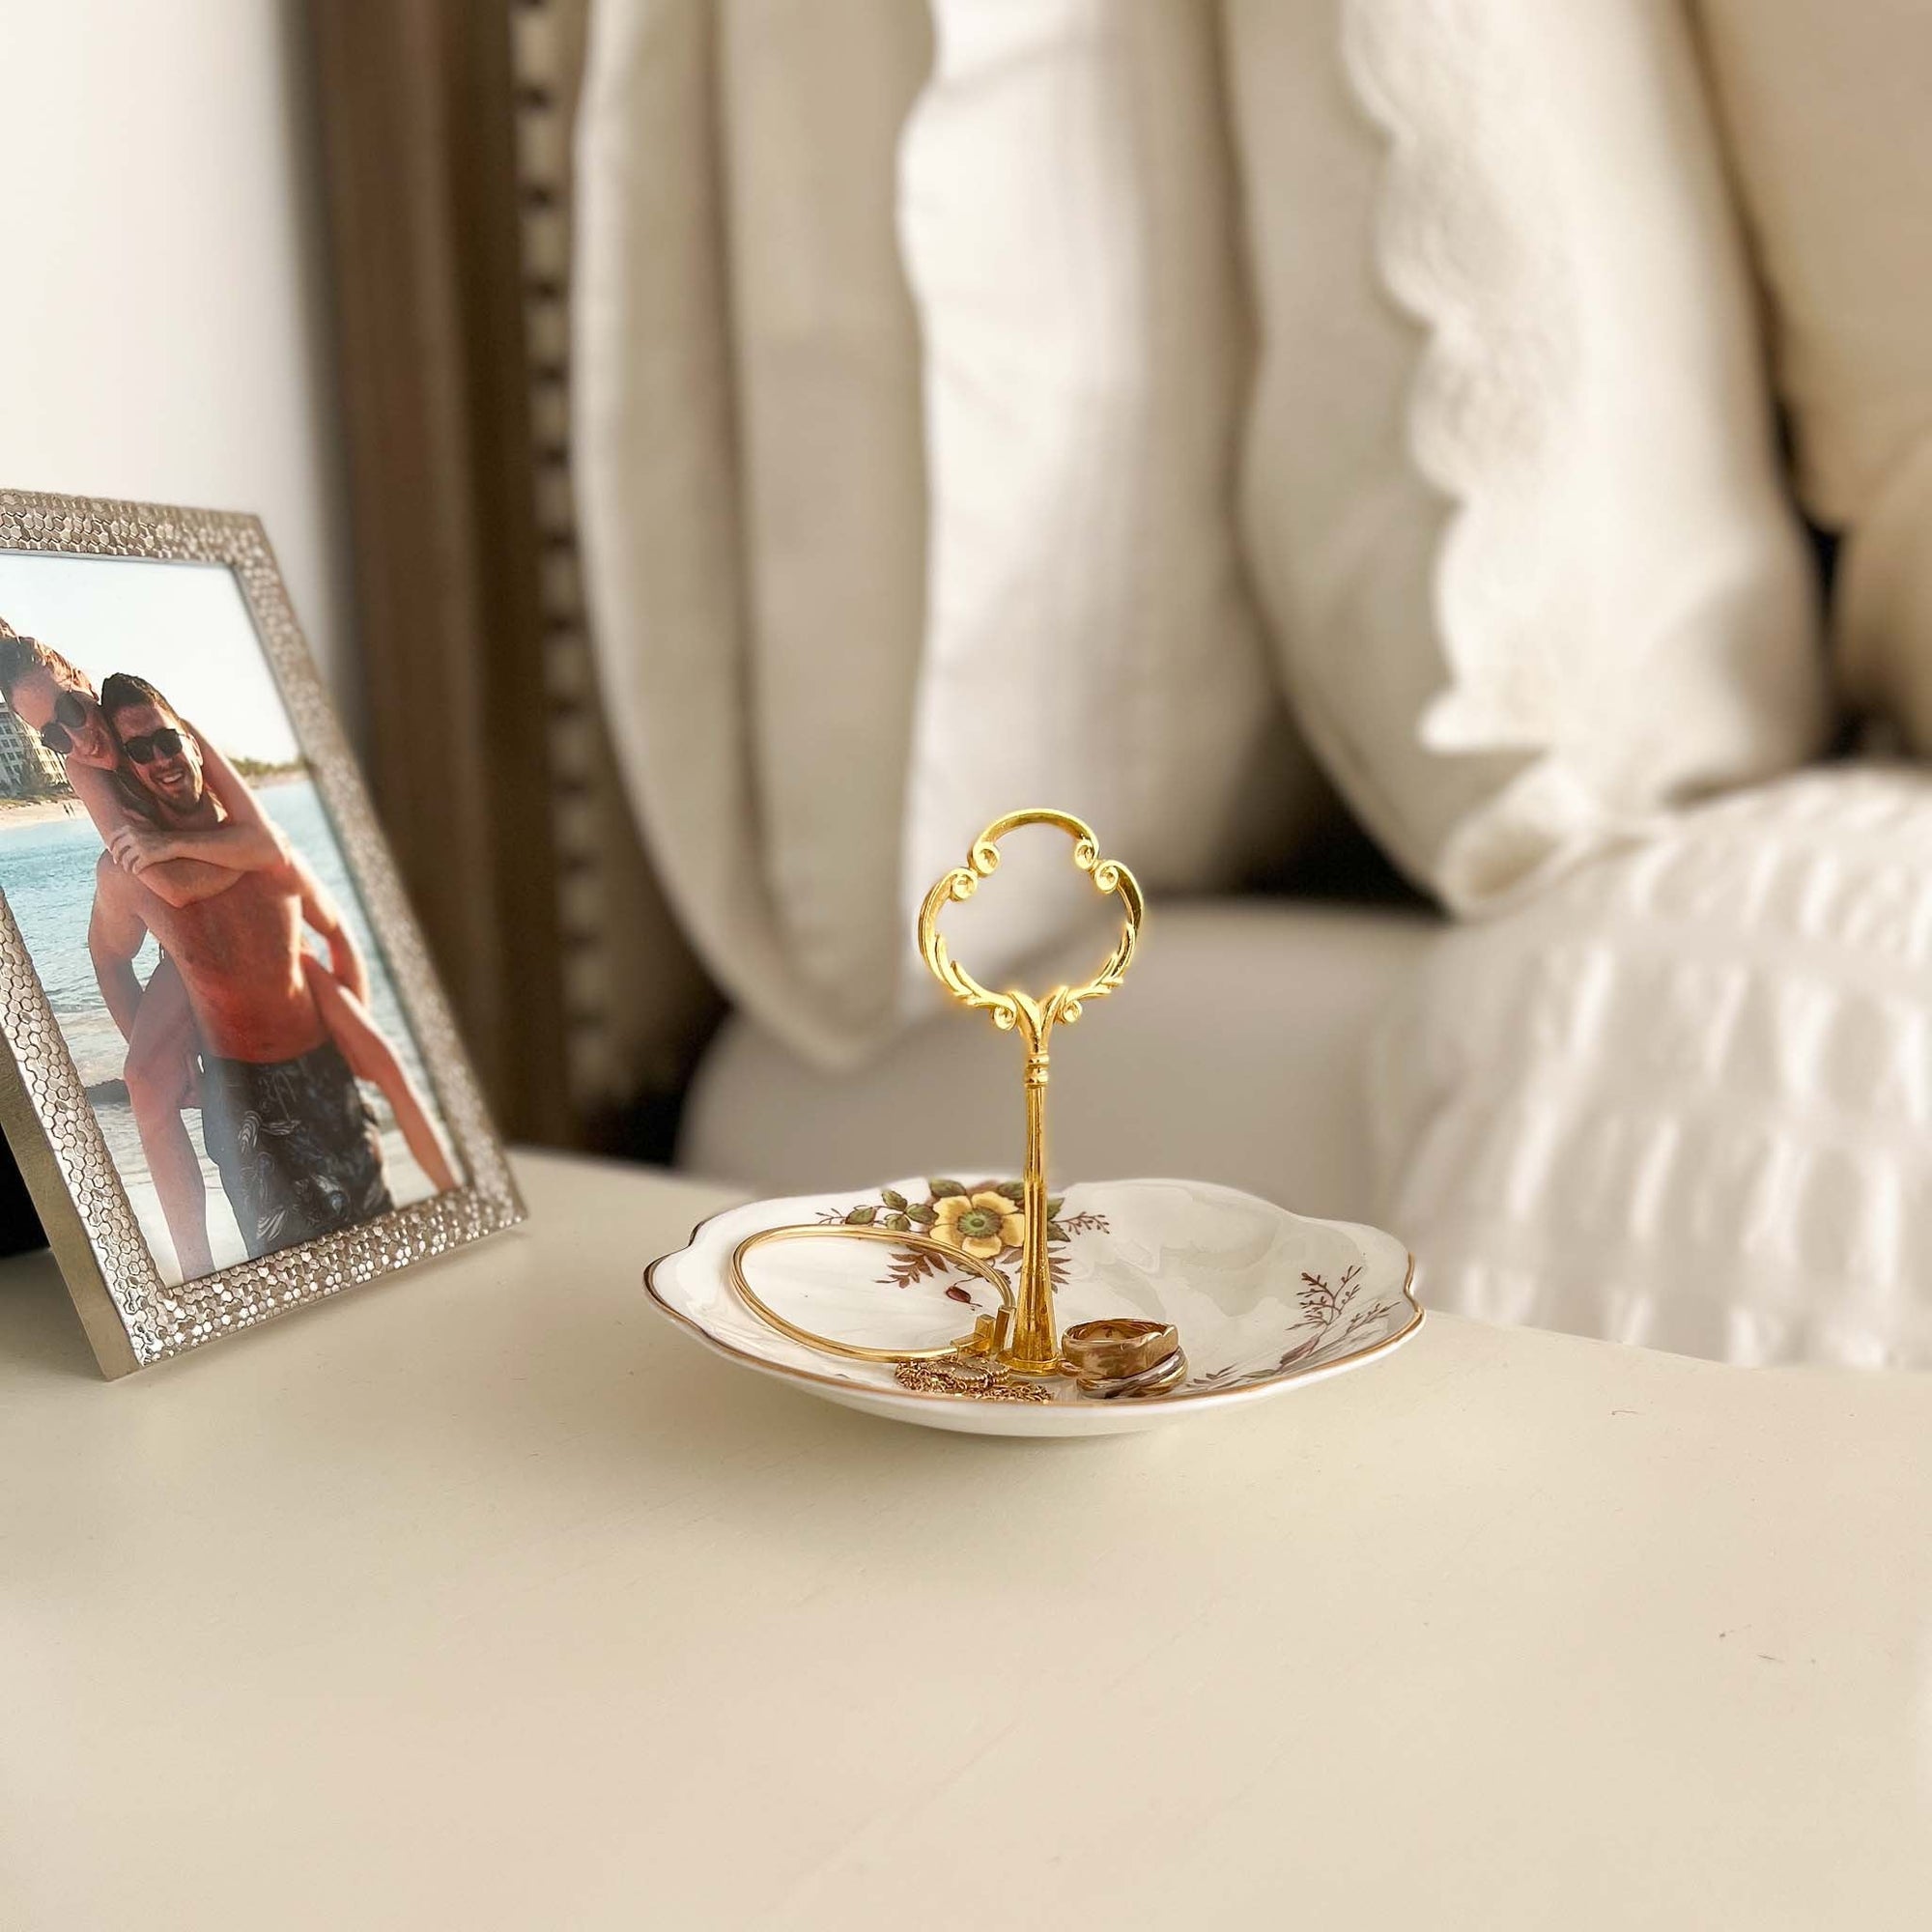 Ring & Candy Dish | Upcycle | The Brooklyn Teacup - The Brooklyn Teacup